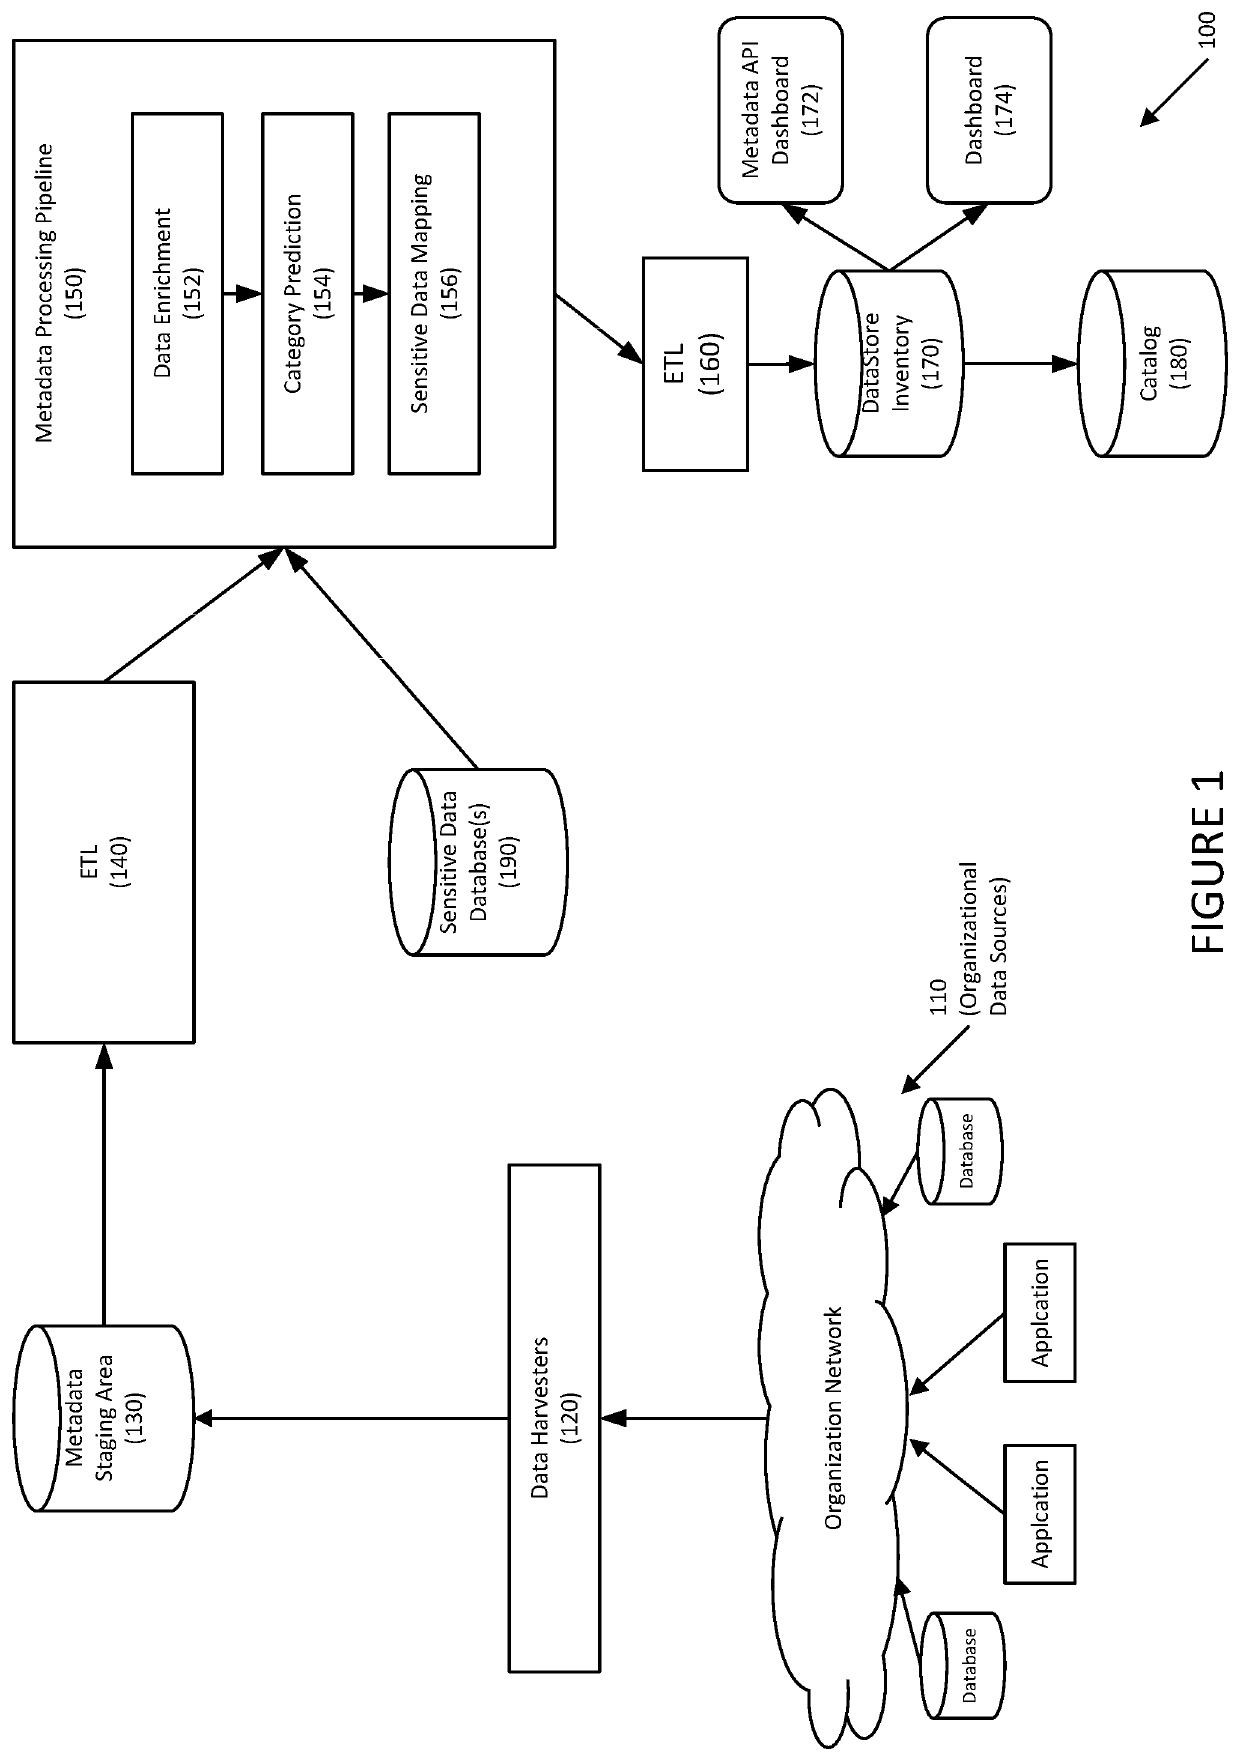 Systems and methods for auto discovery of sensitive data in applications or databases using metadata via machine learning techniques